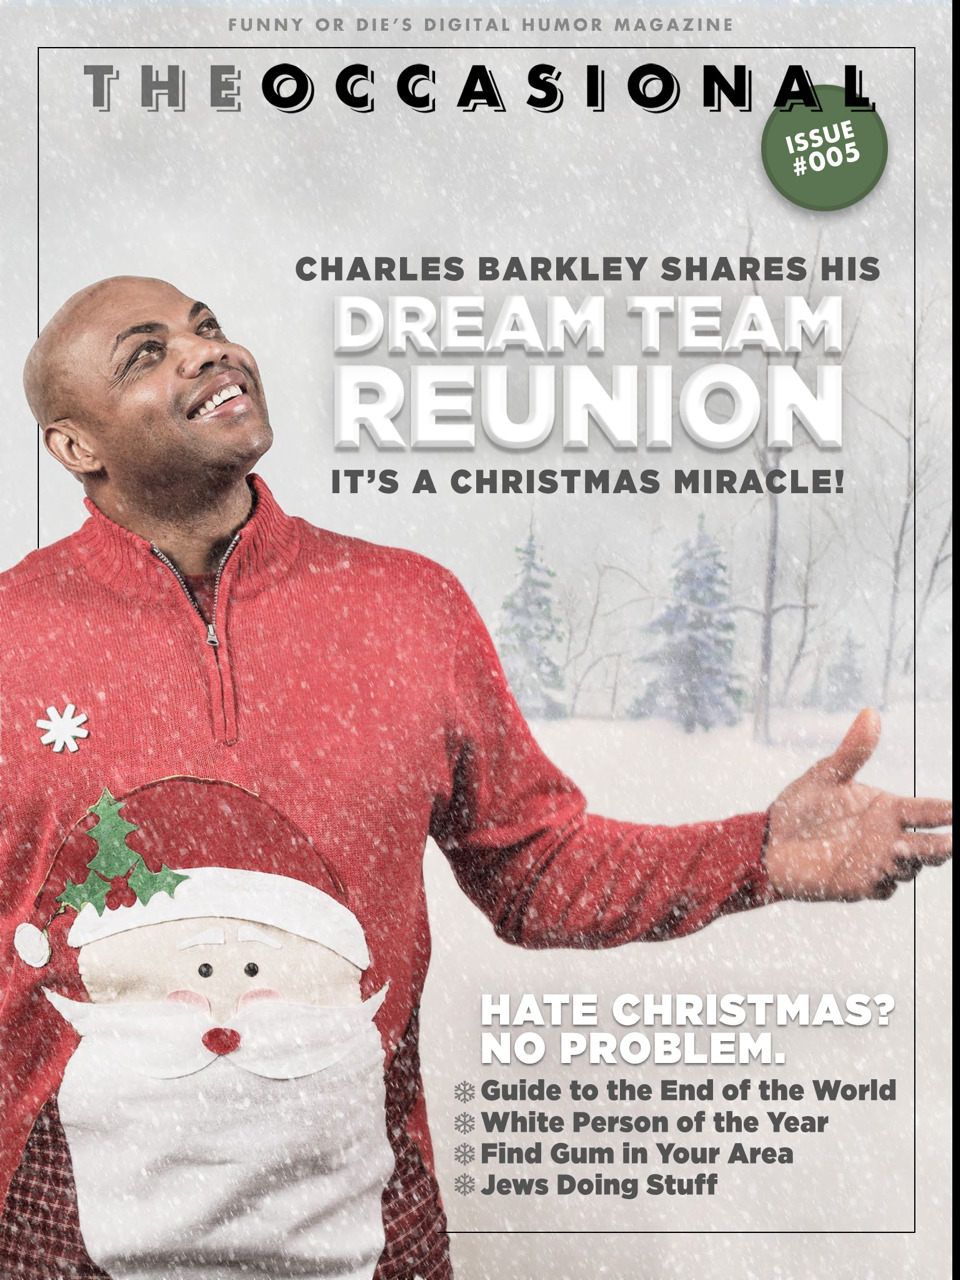 Funny Or Die’s The Occasional: NEW ISSUE!
Charles Barkley graces the cover of the new issue of our interactive magazine! Download The Occasional for iPad and iPhone now to revel in its full glory. It’s a home run!
Also, inside:
• Adam McKay’s ‘Guide...